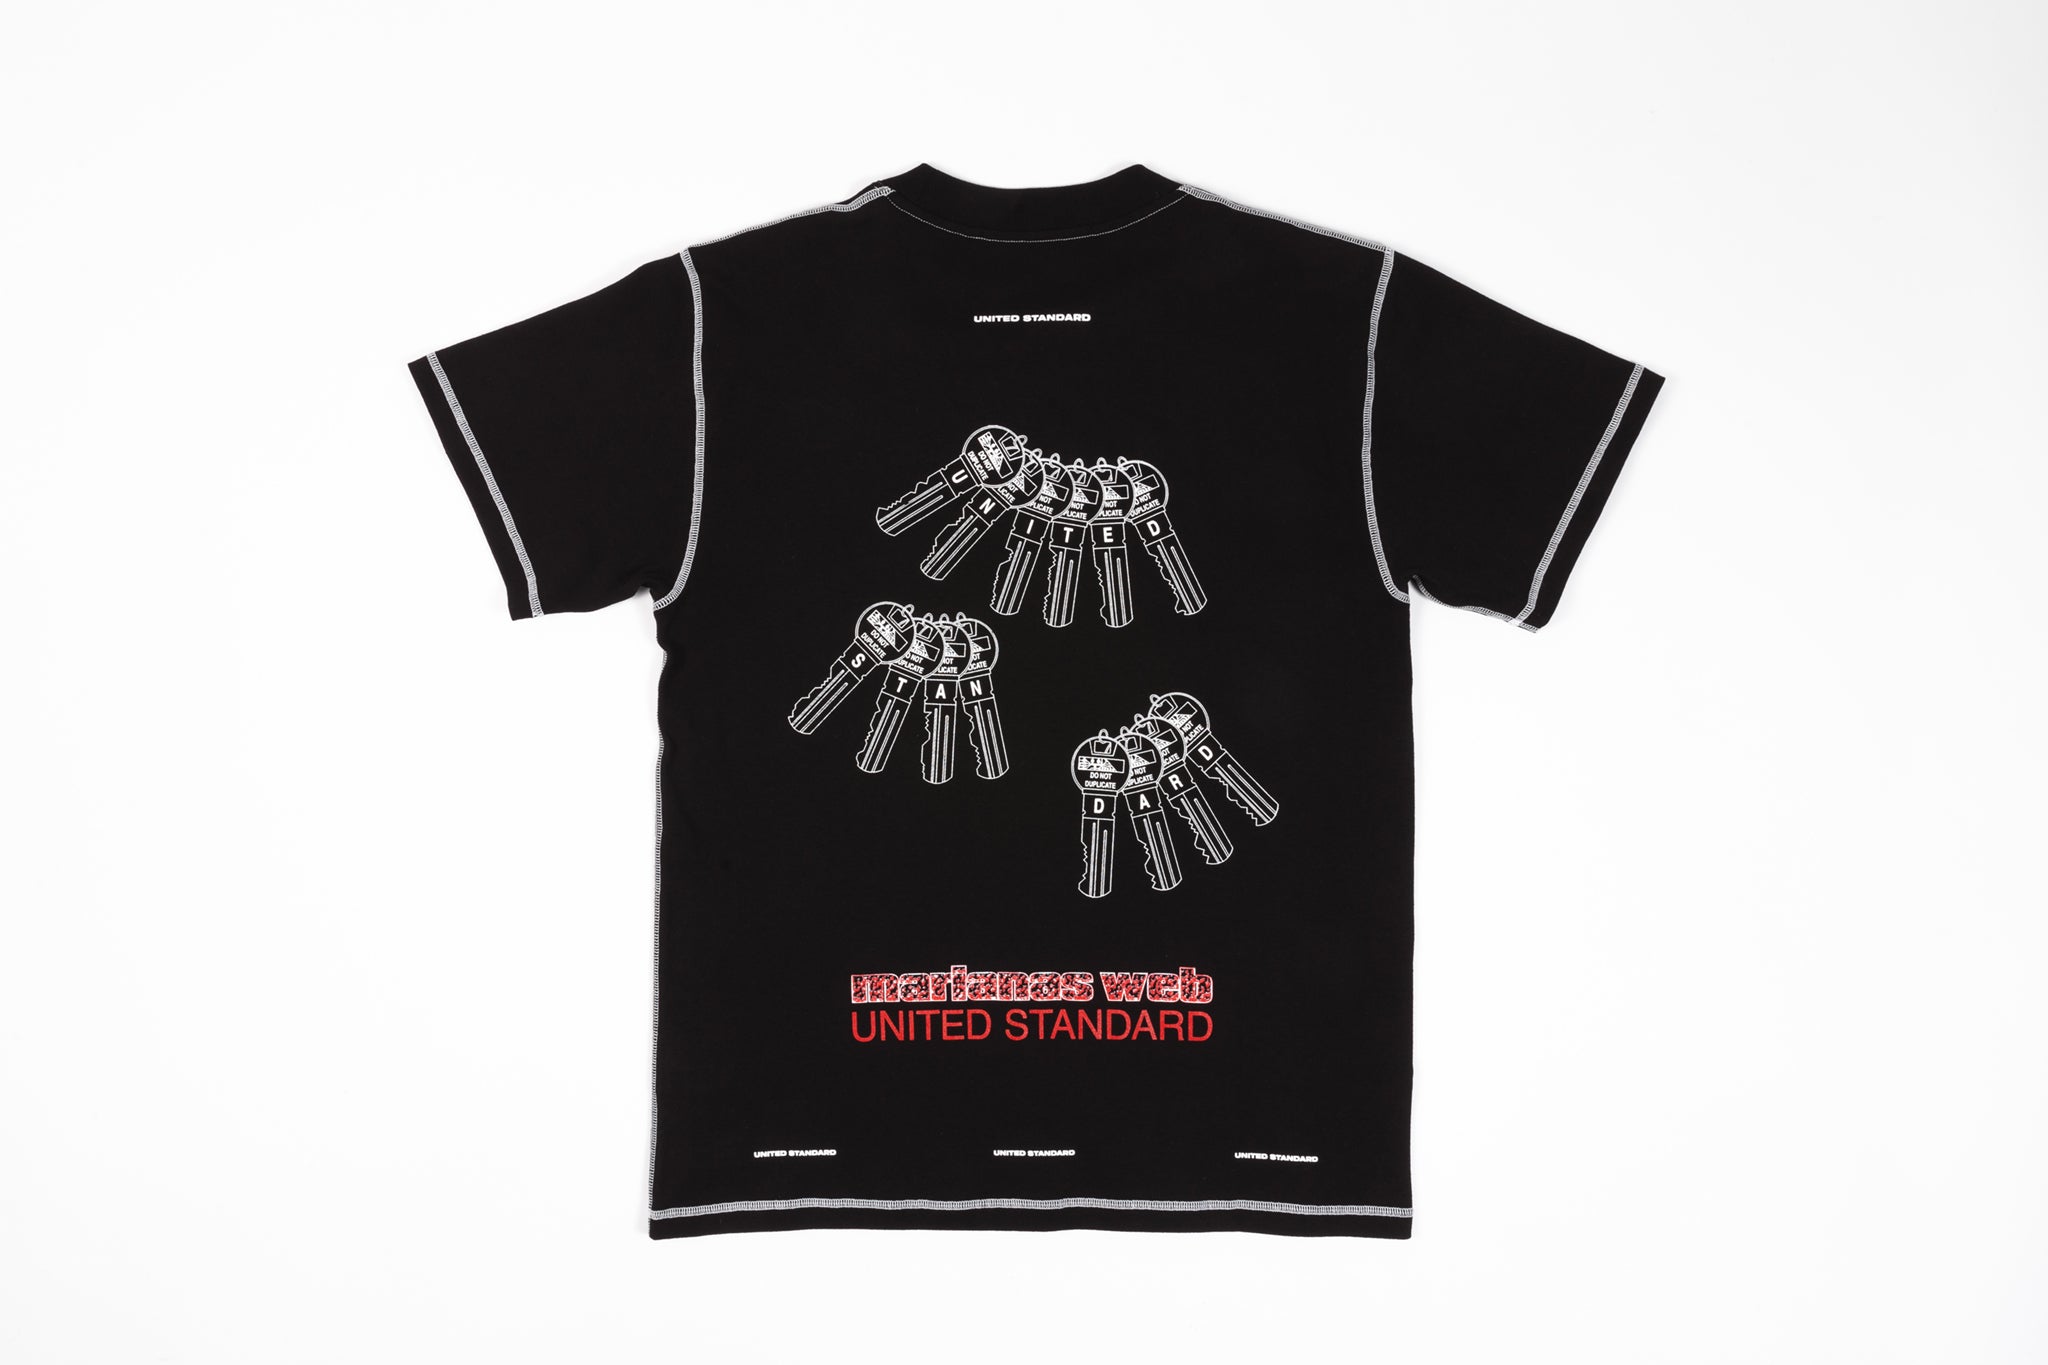 UNITED STANDARD SYSTEM CHECK S/S T-SHIRT